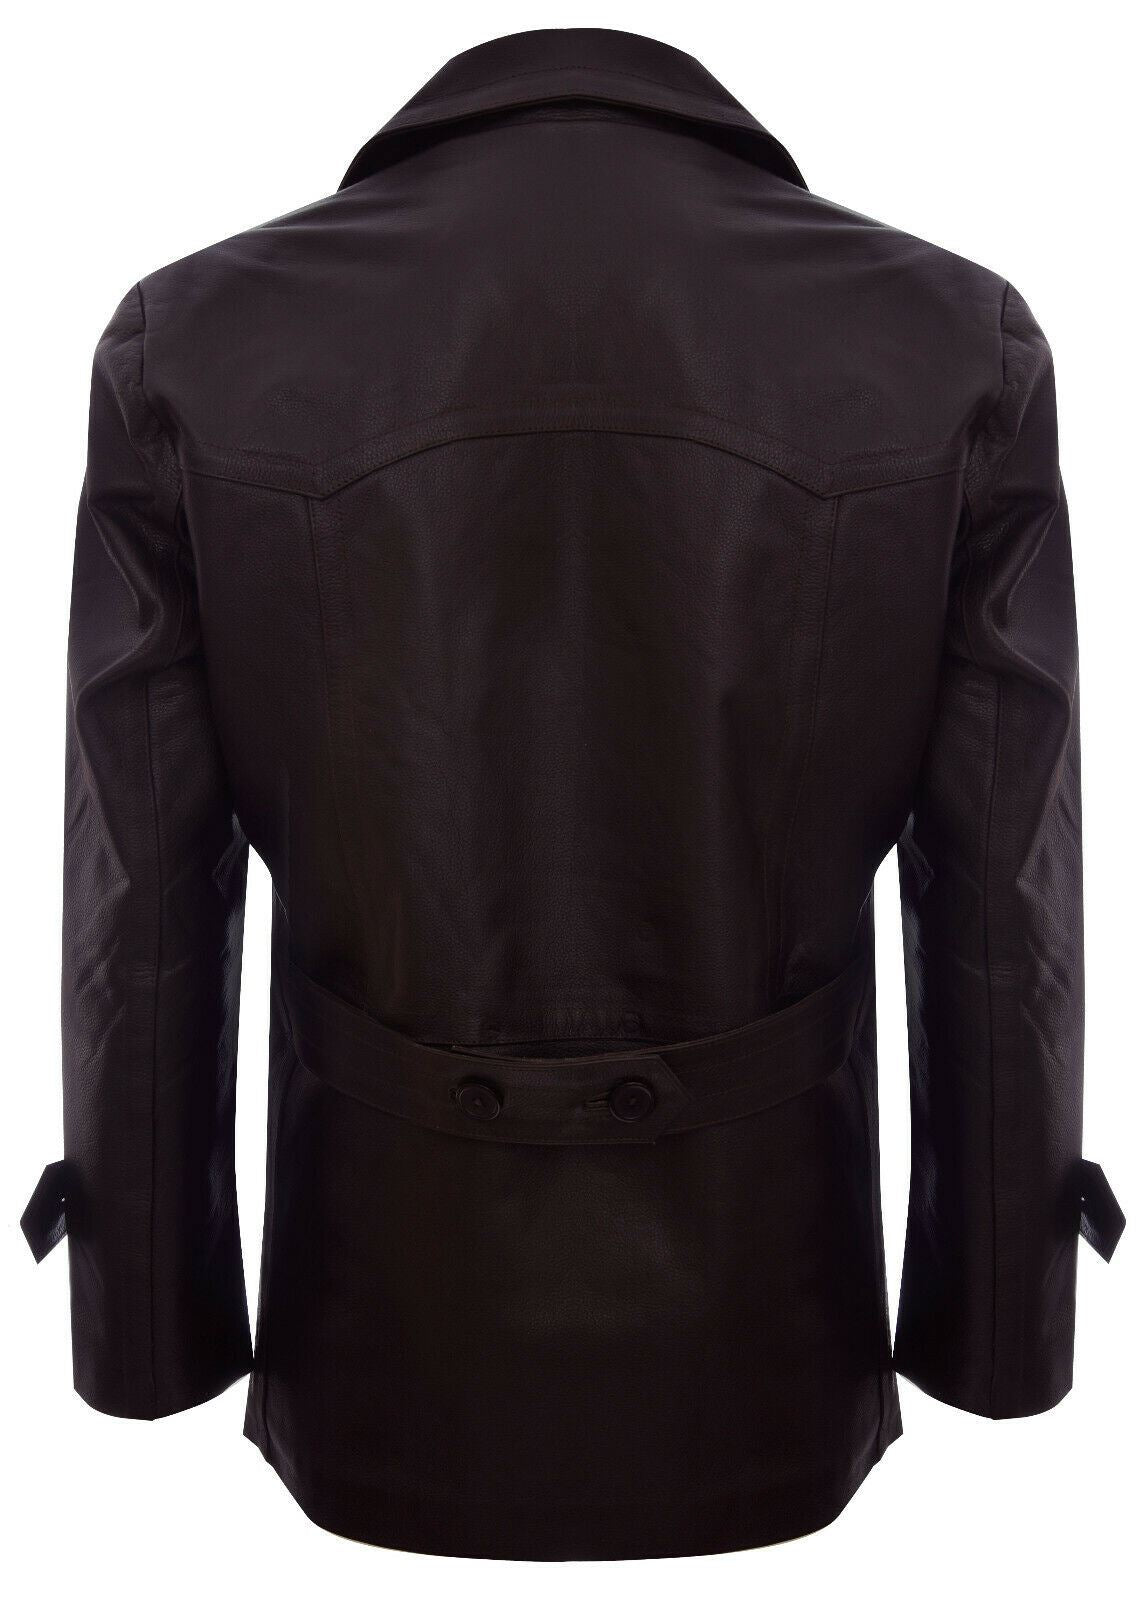 Mens Leather CowHide German Peacoat-Epping - Upperclass Fashions 